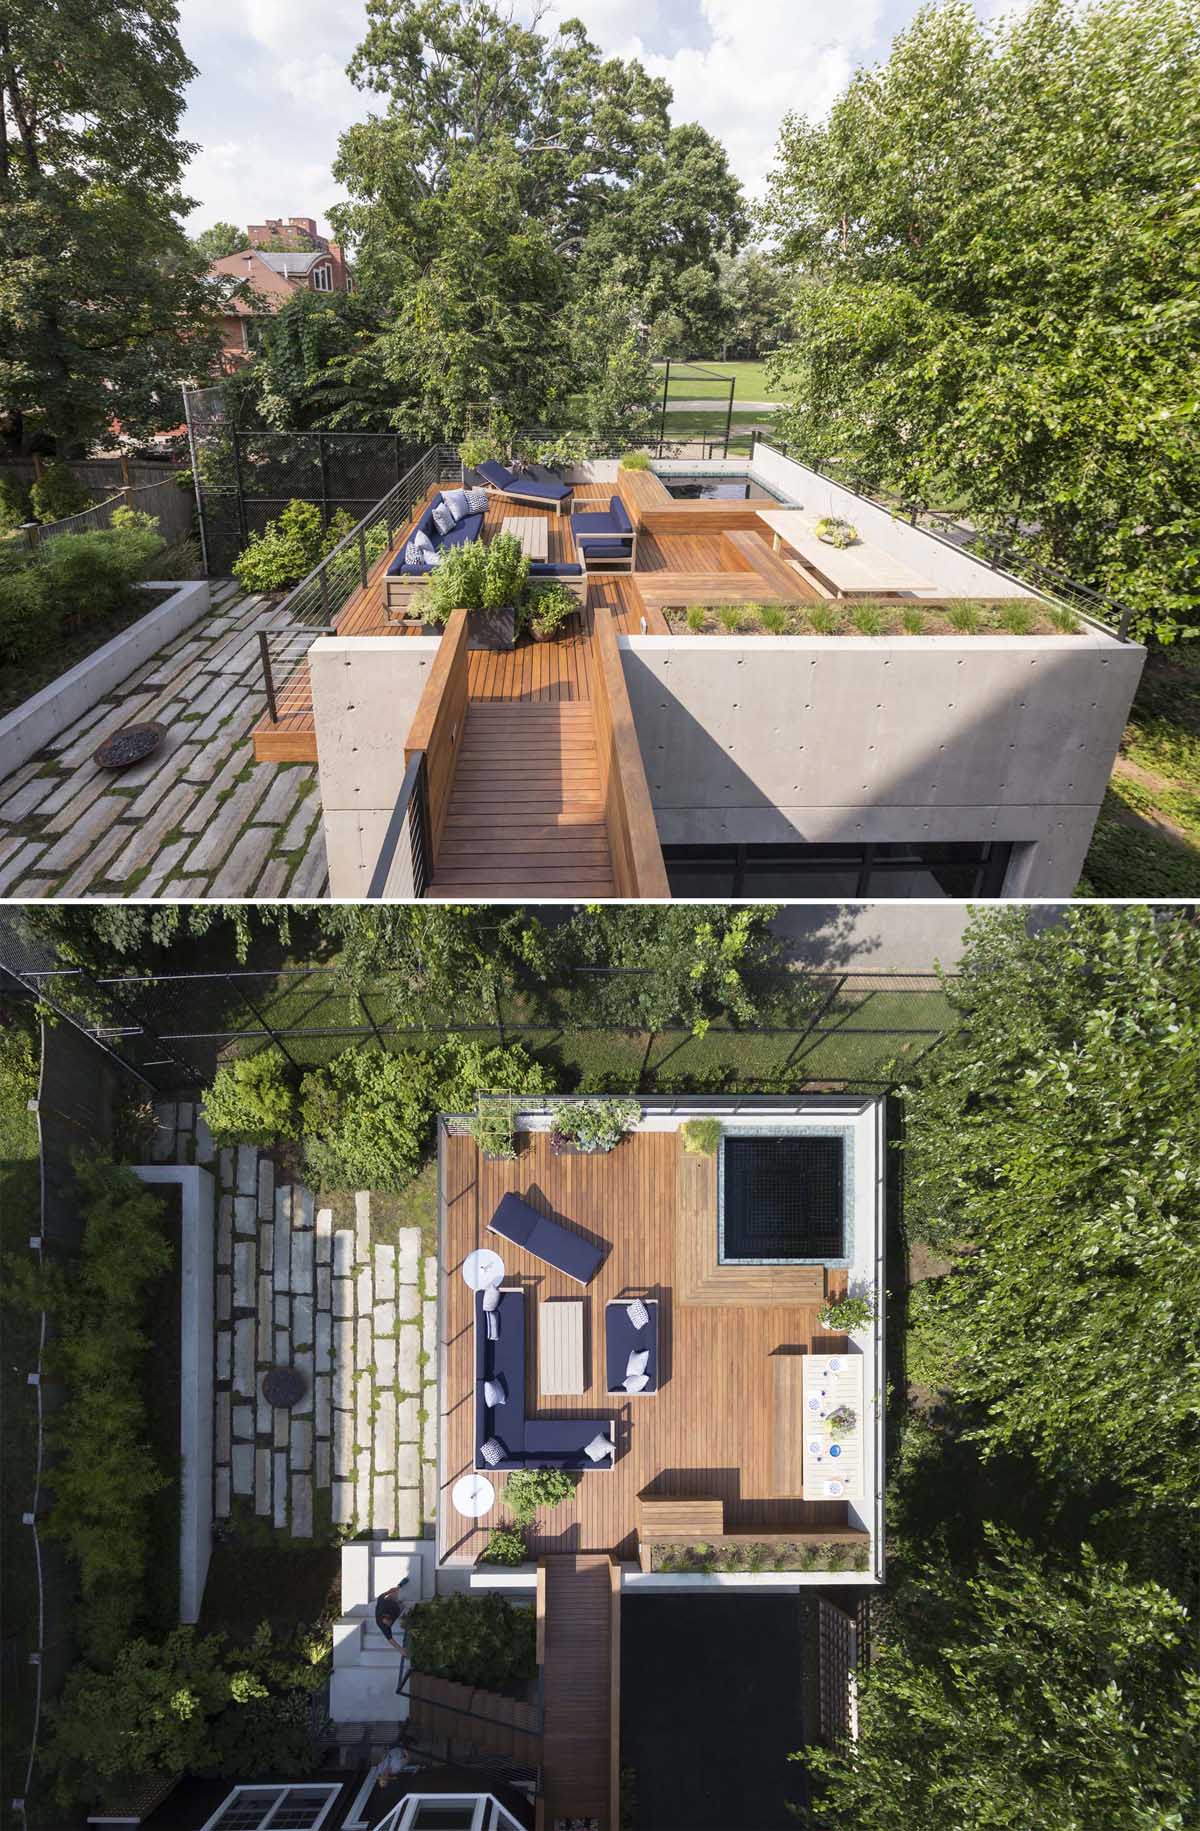 This garage rooftop deck, which is made from Ipe and is ideal for entertaining, includes custom built-in planters, a dining area with bench seating, and a lounge area.